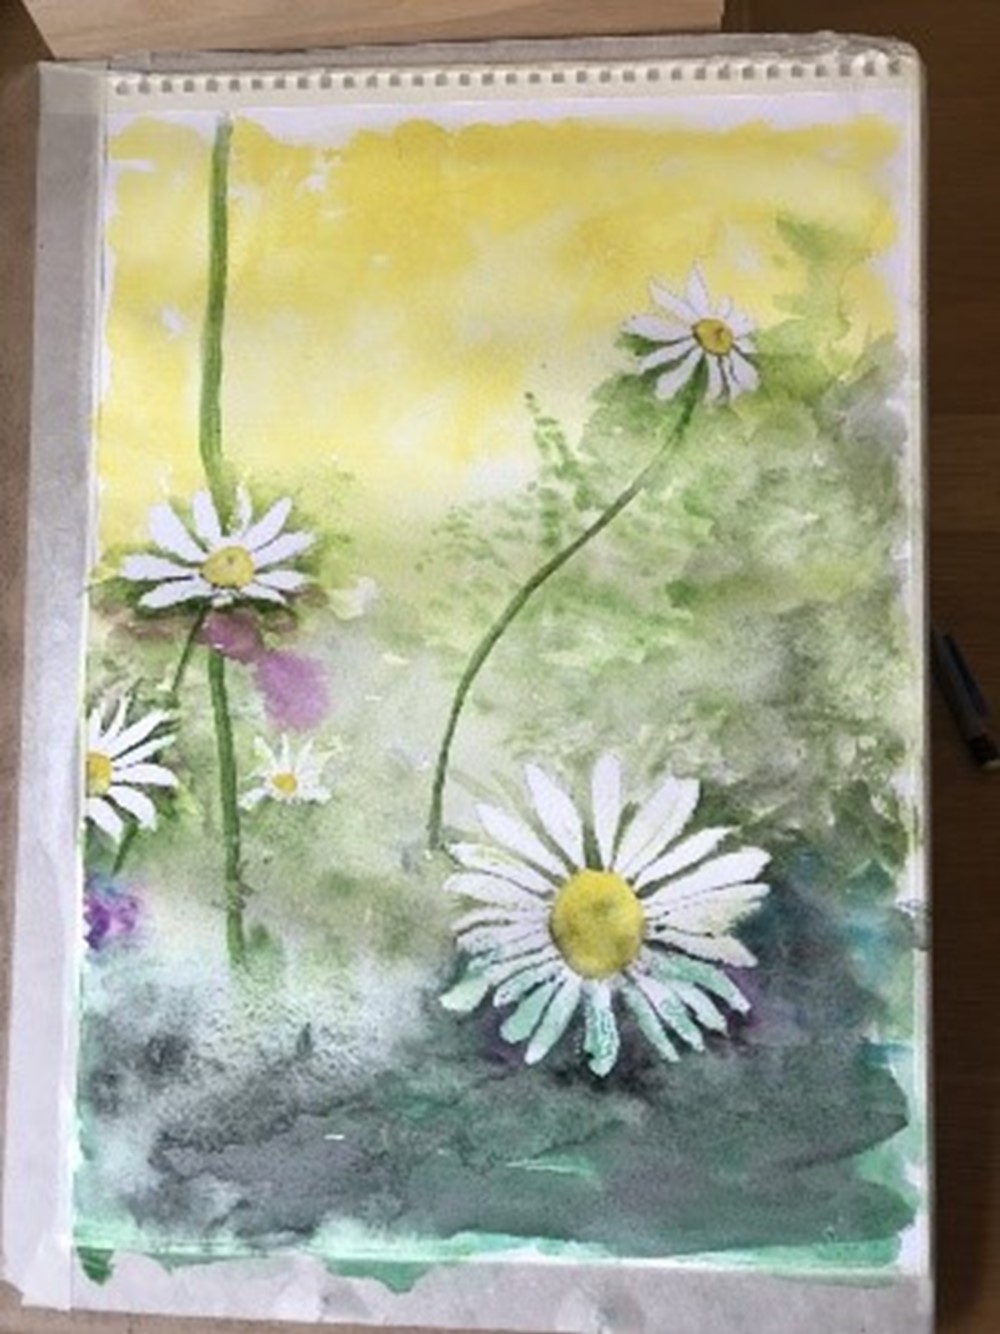 Learner watercolour painting of daisies